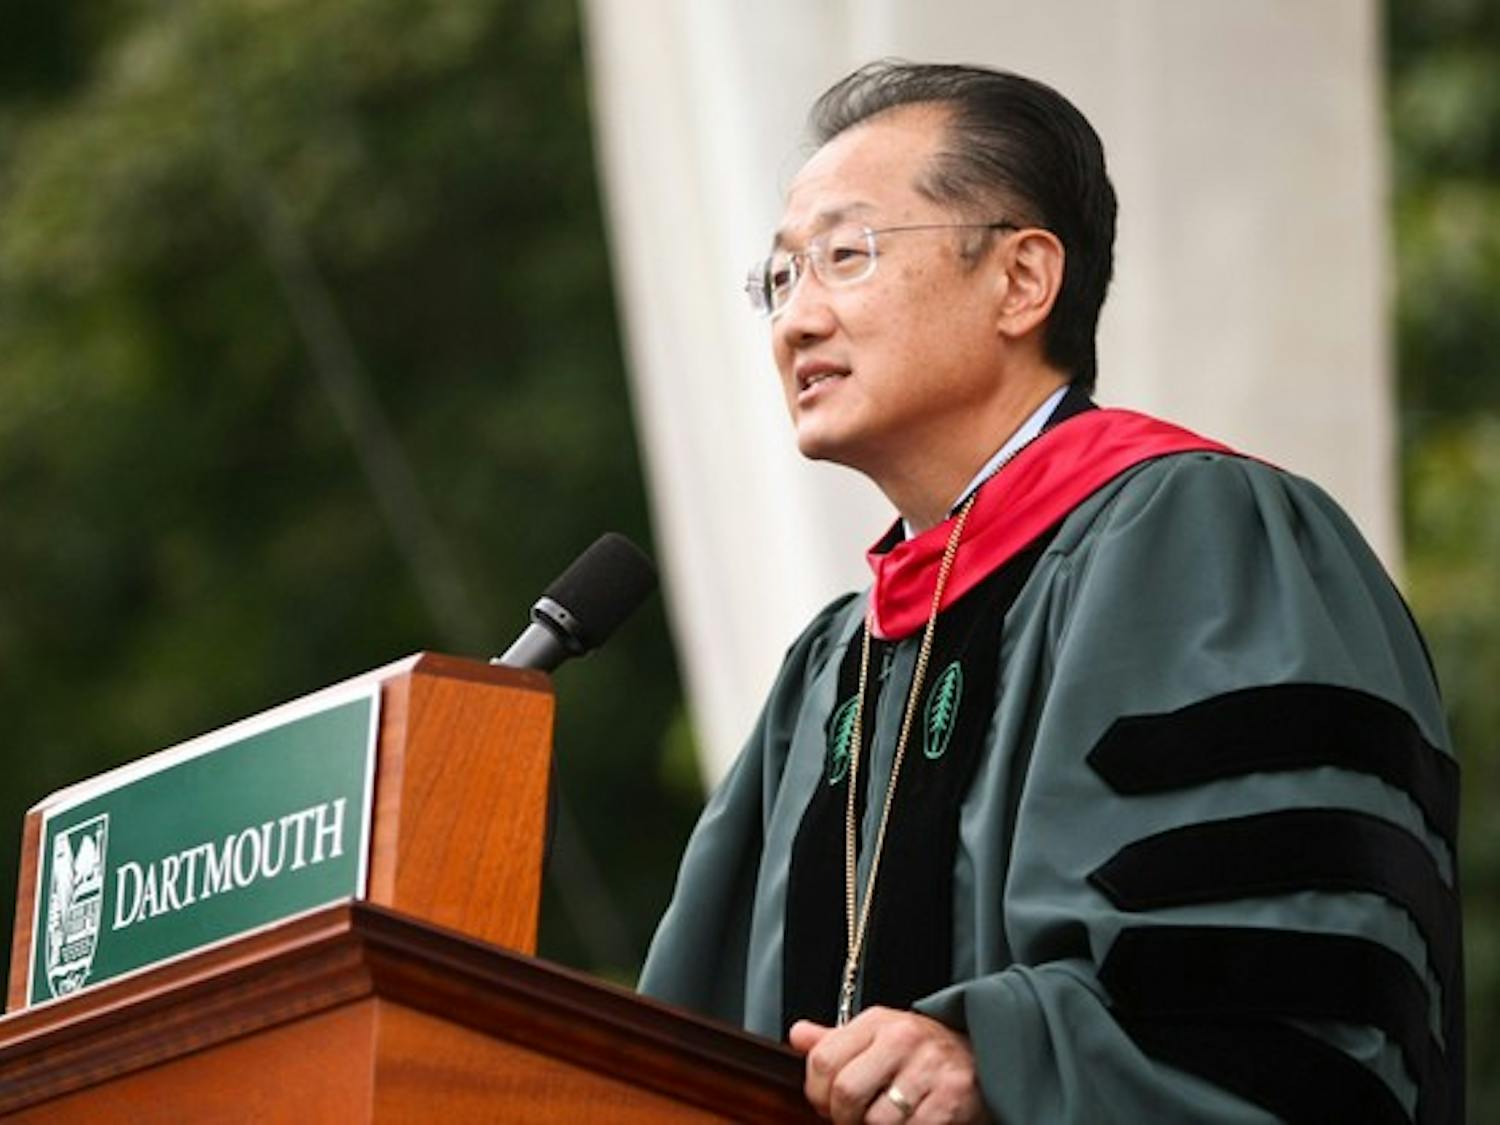 The World Bank board of directors confirmed College President Jim Yong Kim as the next president of the Bank.